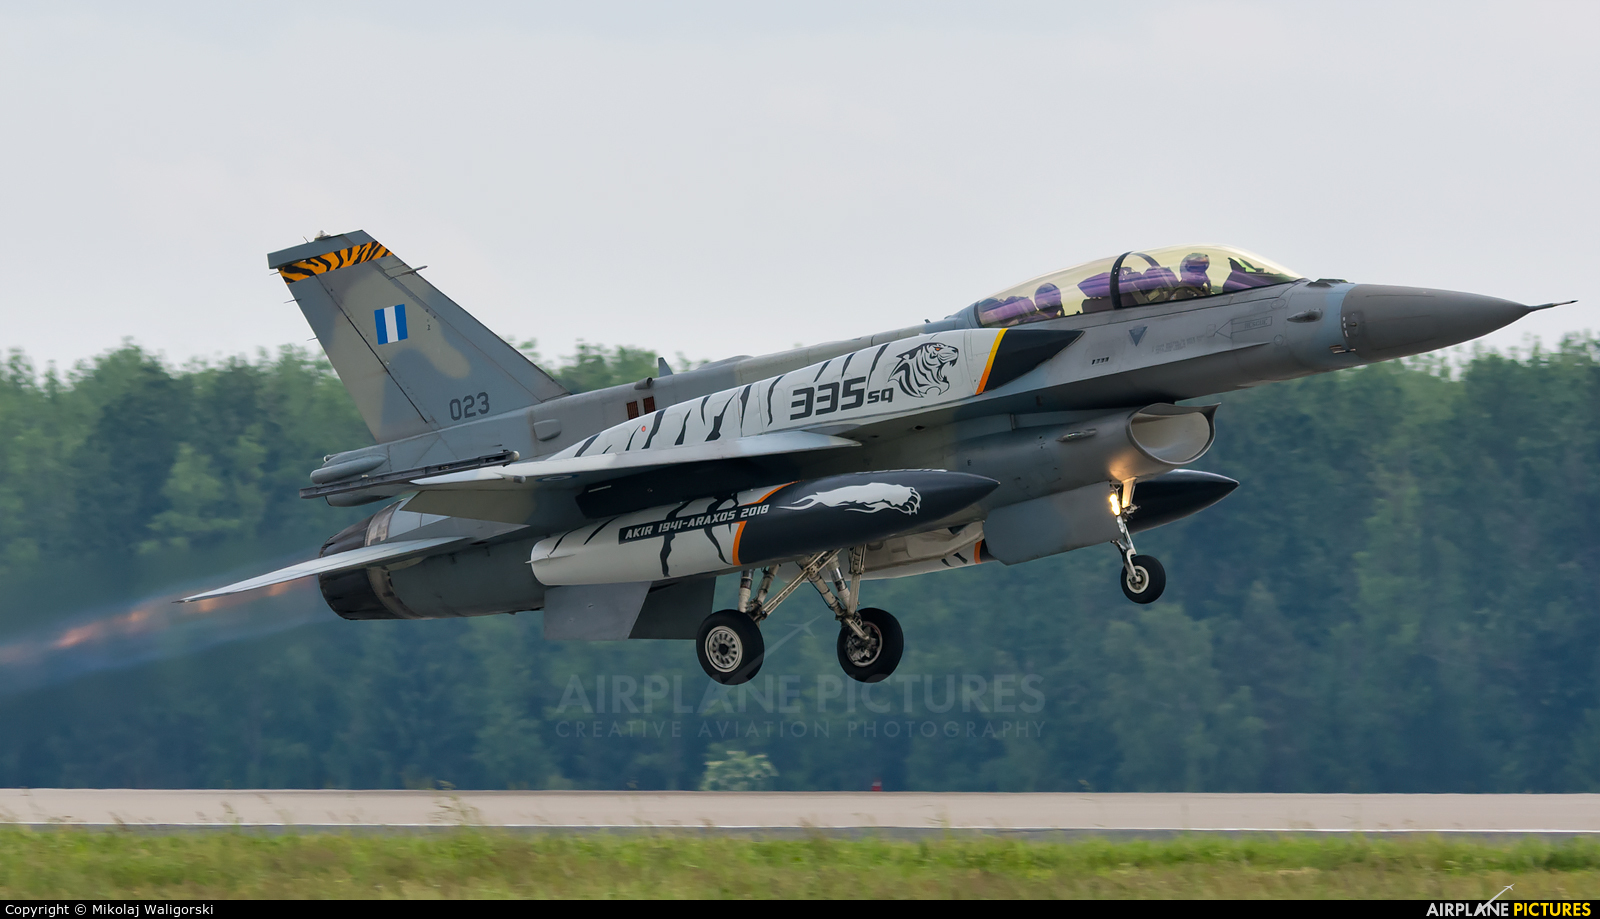 Greece - Hellenic Air Force 023 aircraft at Poznań - Krzesiny